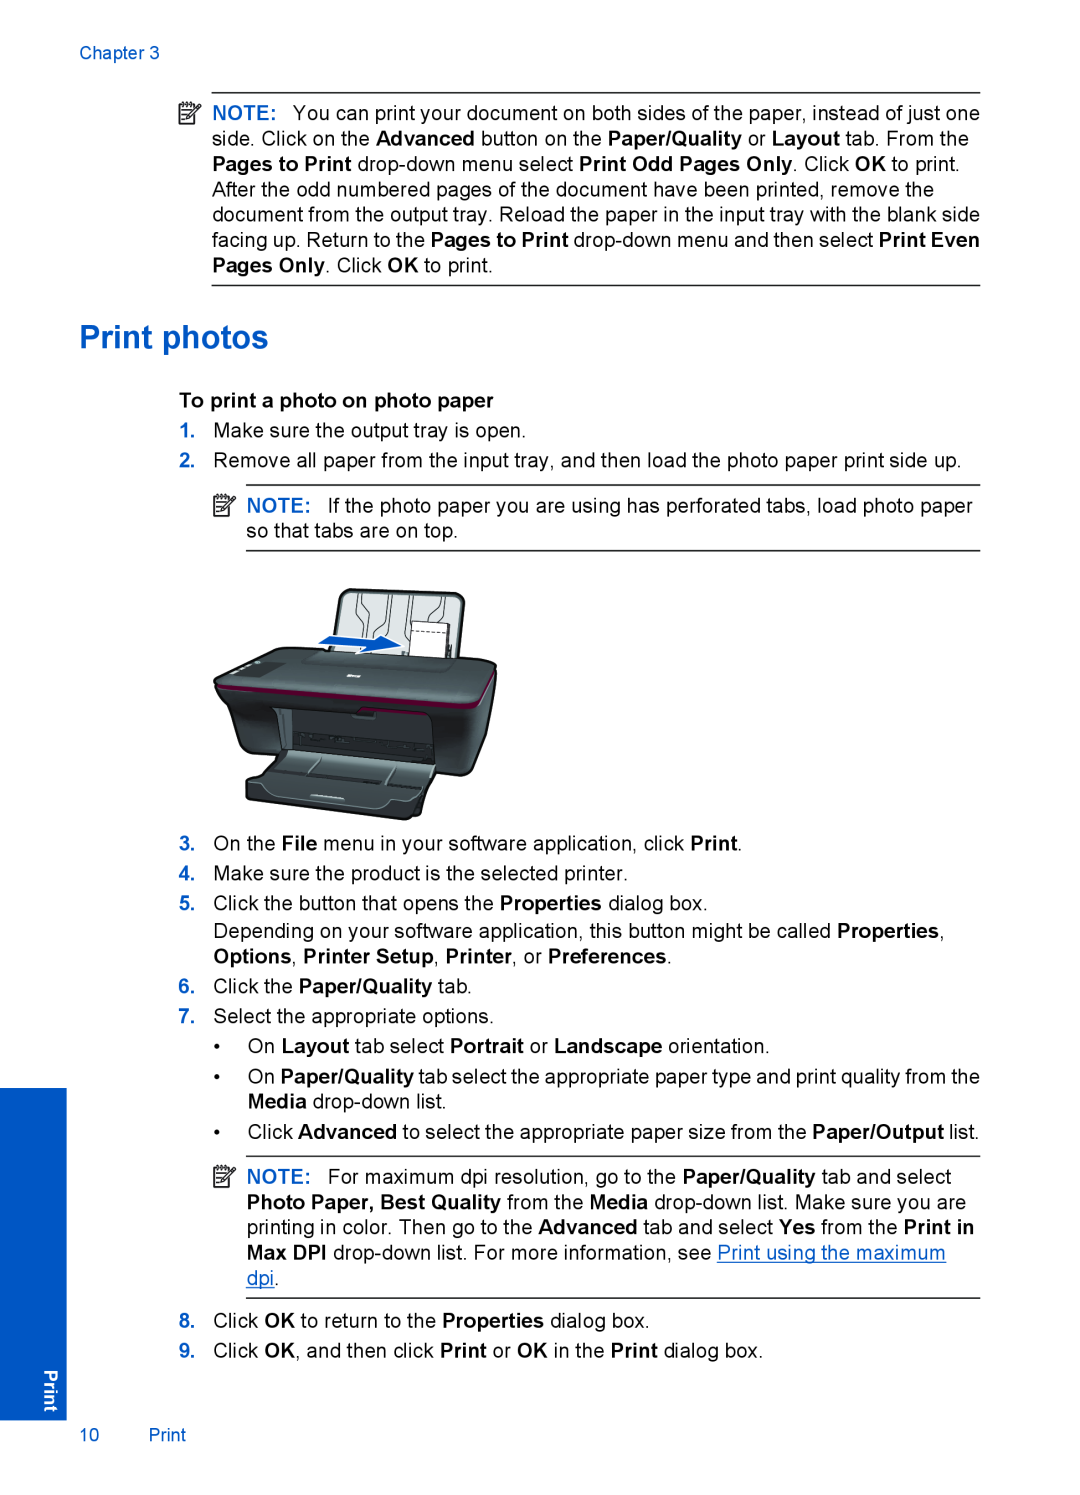 HP 1051, 1050 - J410a, 1056 - J410a, 1055 - J410e manual Print photos, To print a photo on photo paper 